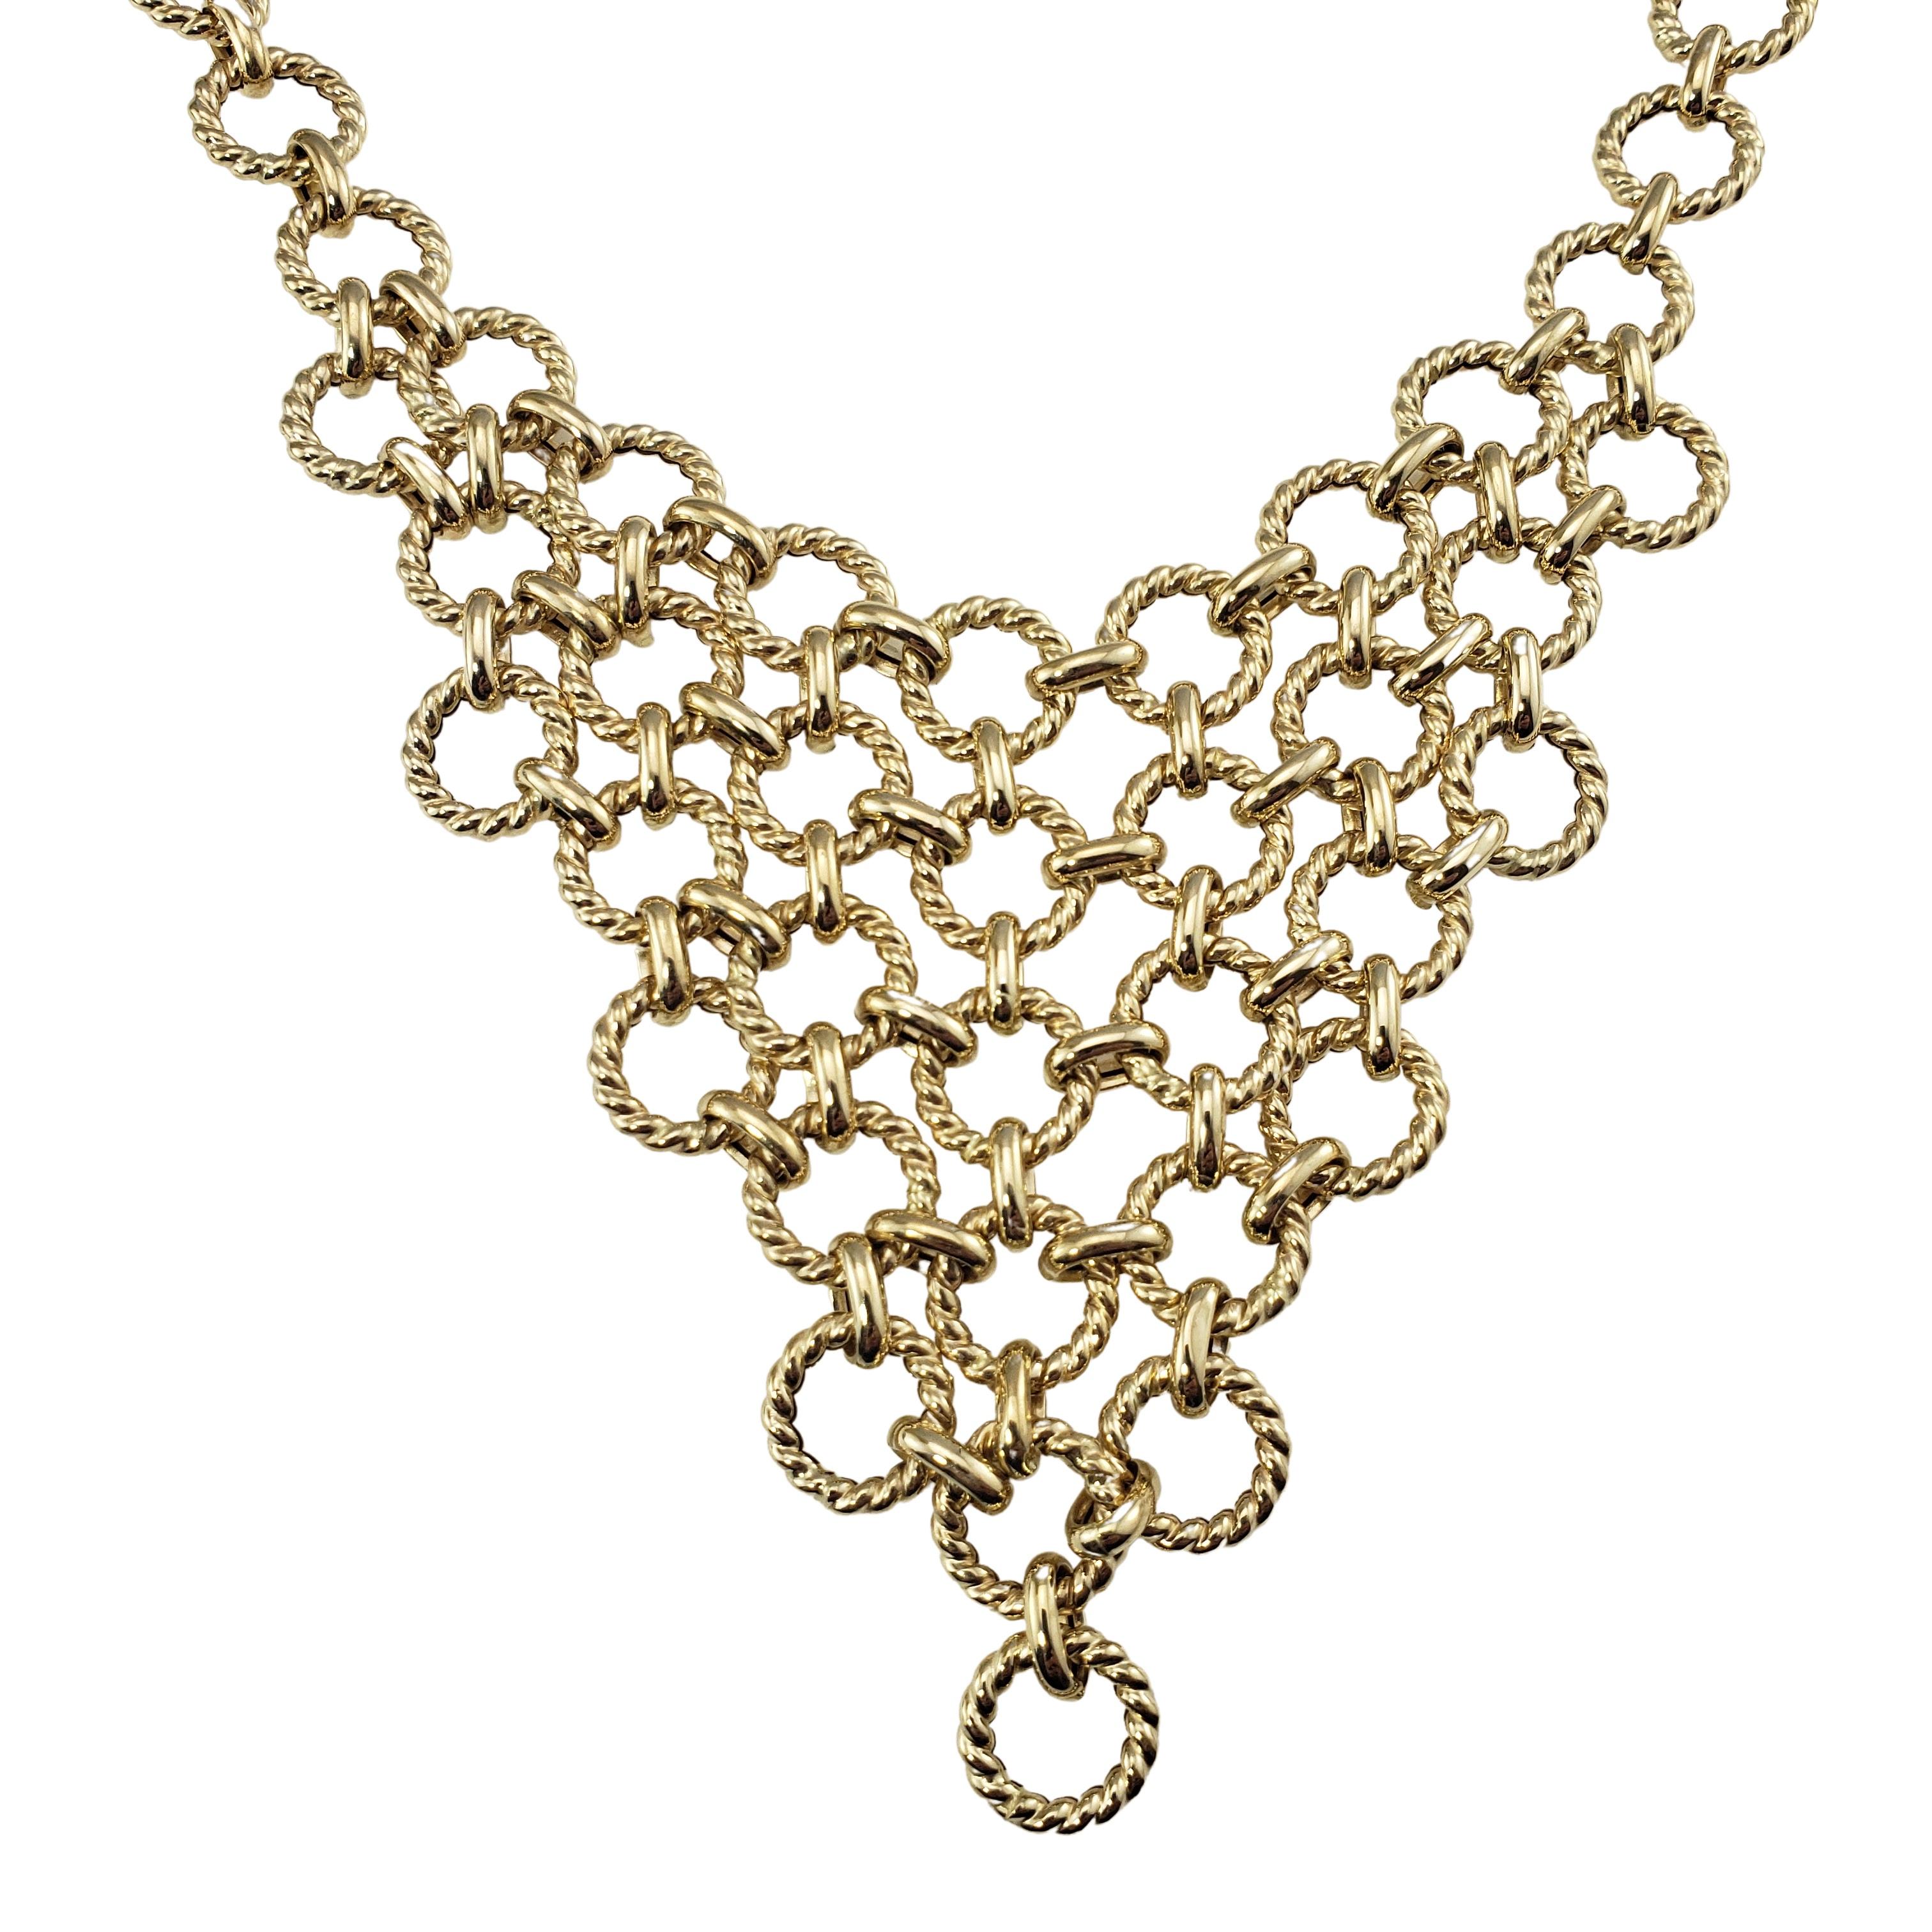 Vintage 14 Karat Yellow Gold Bib Necklace-

This elegant bib necklace is crafted in beautifully detailed 14K yellow gold.

Size: 18 inches  Drop: 3 inches

Weight:  11.2 dwt. /  17.4 gr.

Hallmark:  MILOR  14K  ITALY

Very good condition,